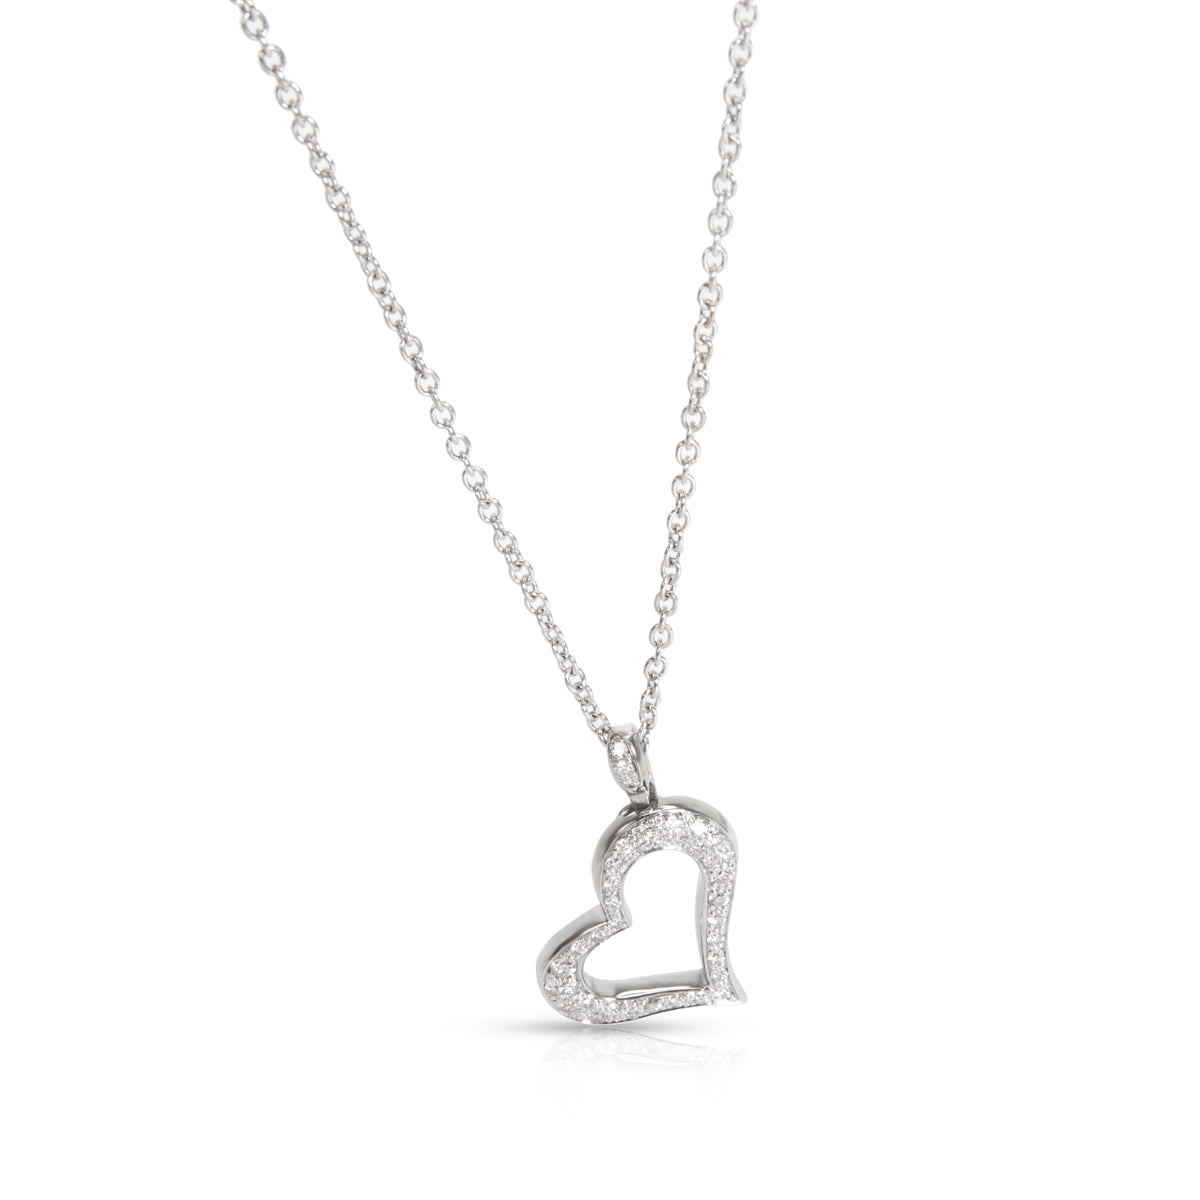 Diamond Heart Necklace in 18K White Gold 0.24 CTW